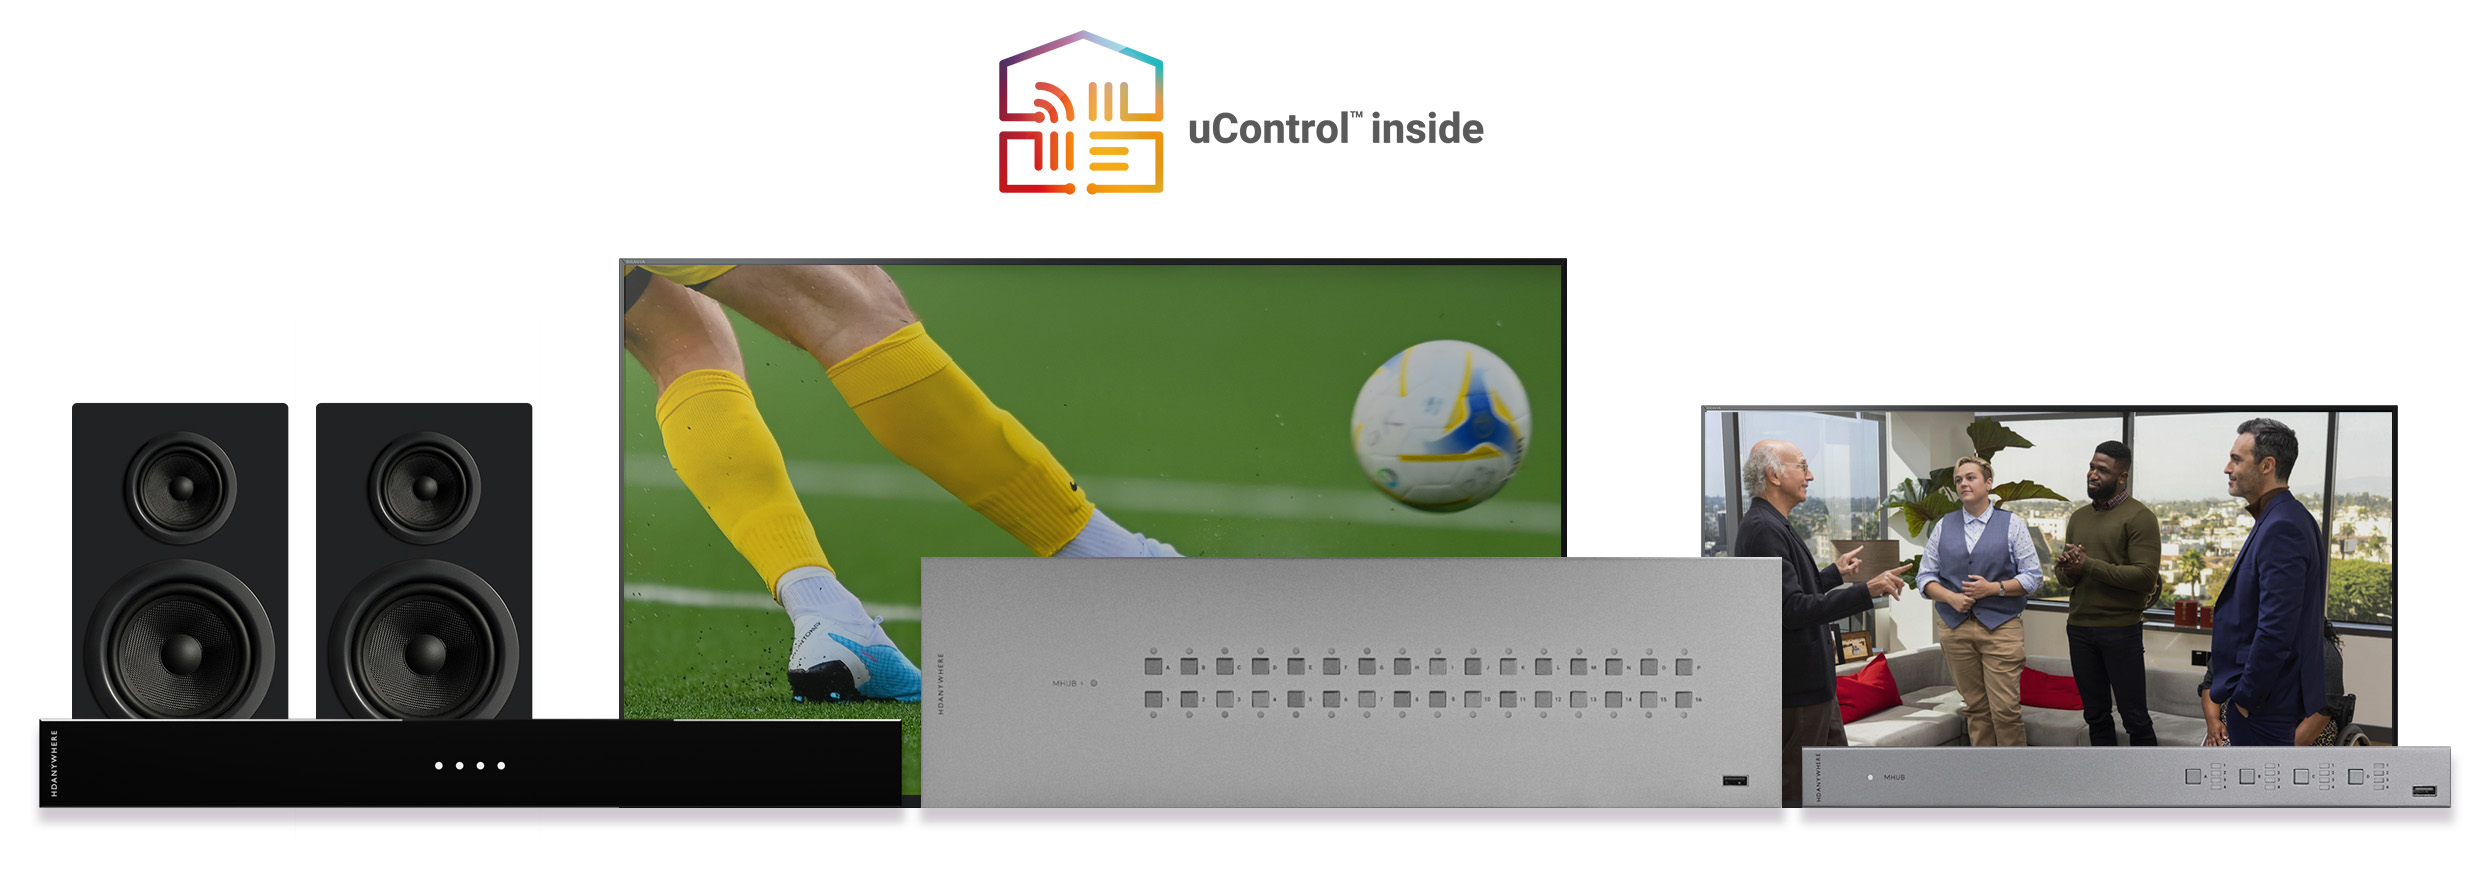 uControl can be found inside all HDANYWHERE MHUB, MZMA and Zone Processor devices